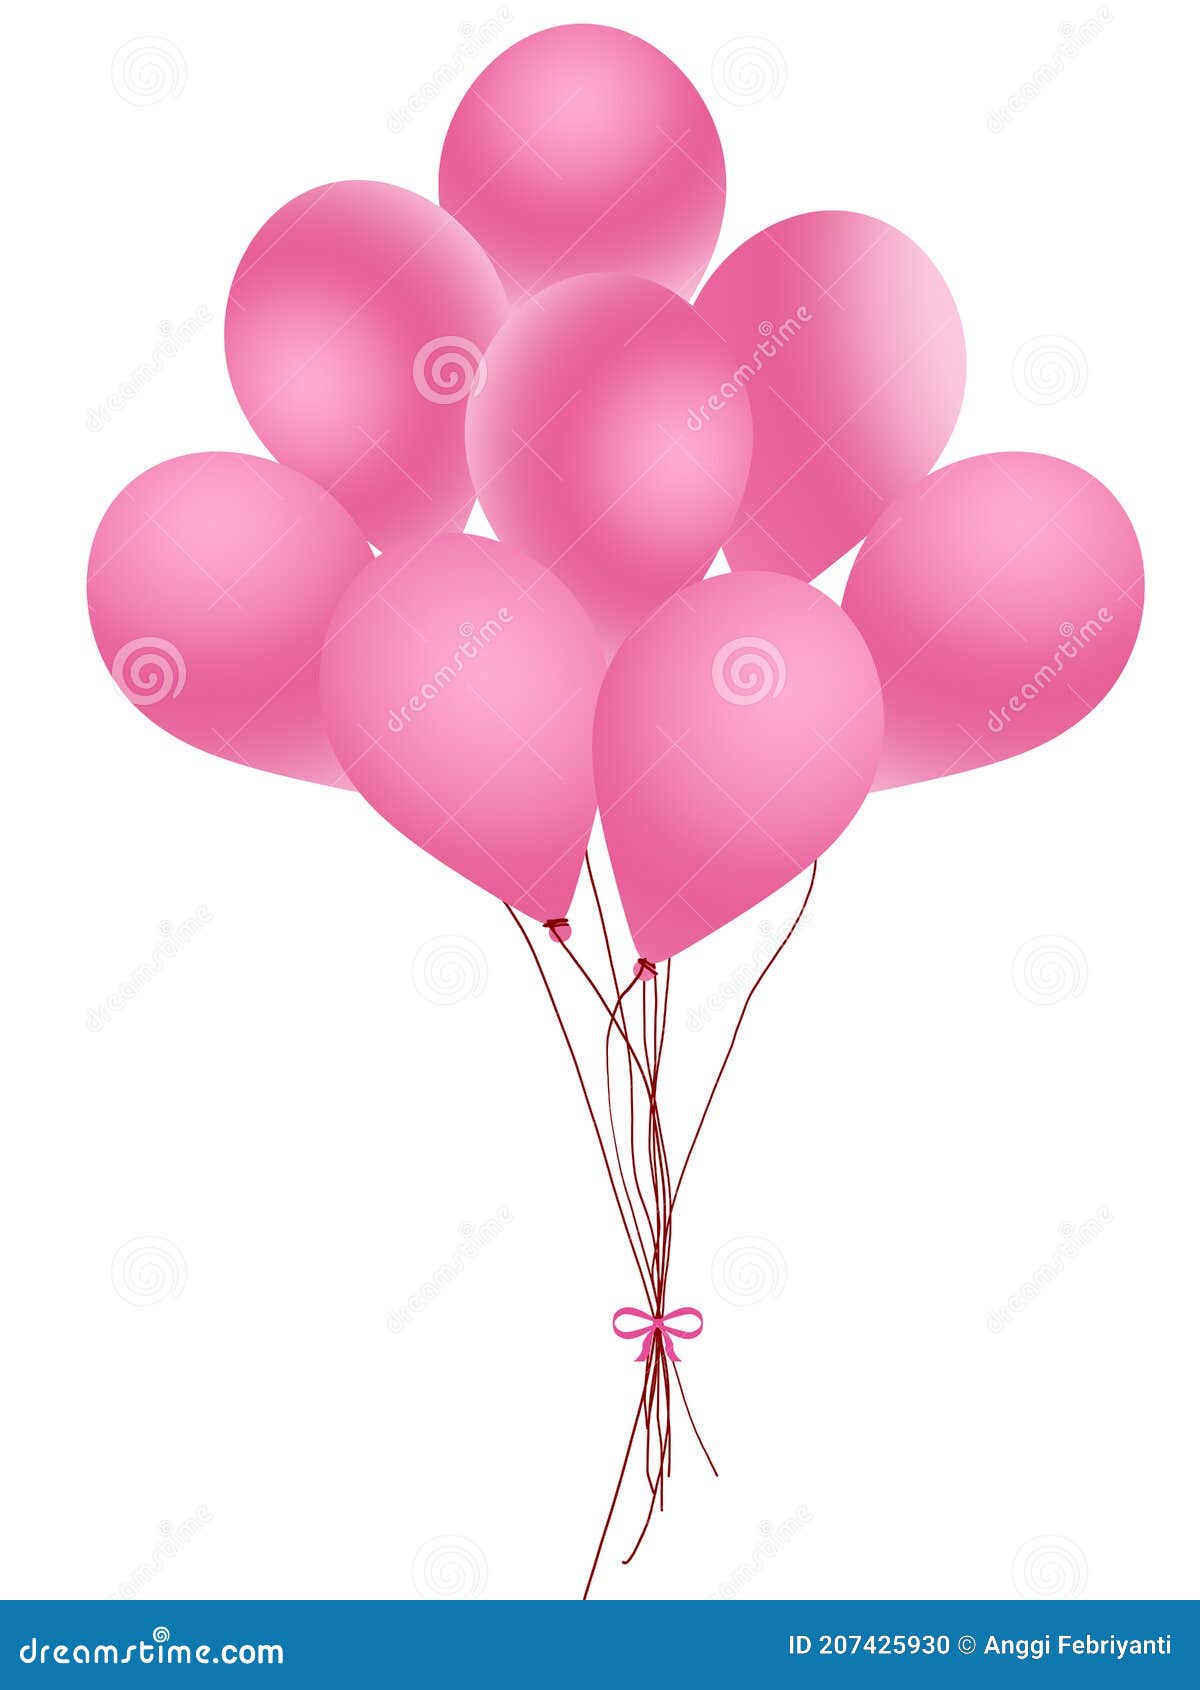 balloon clipart png